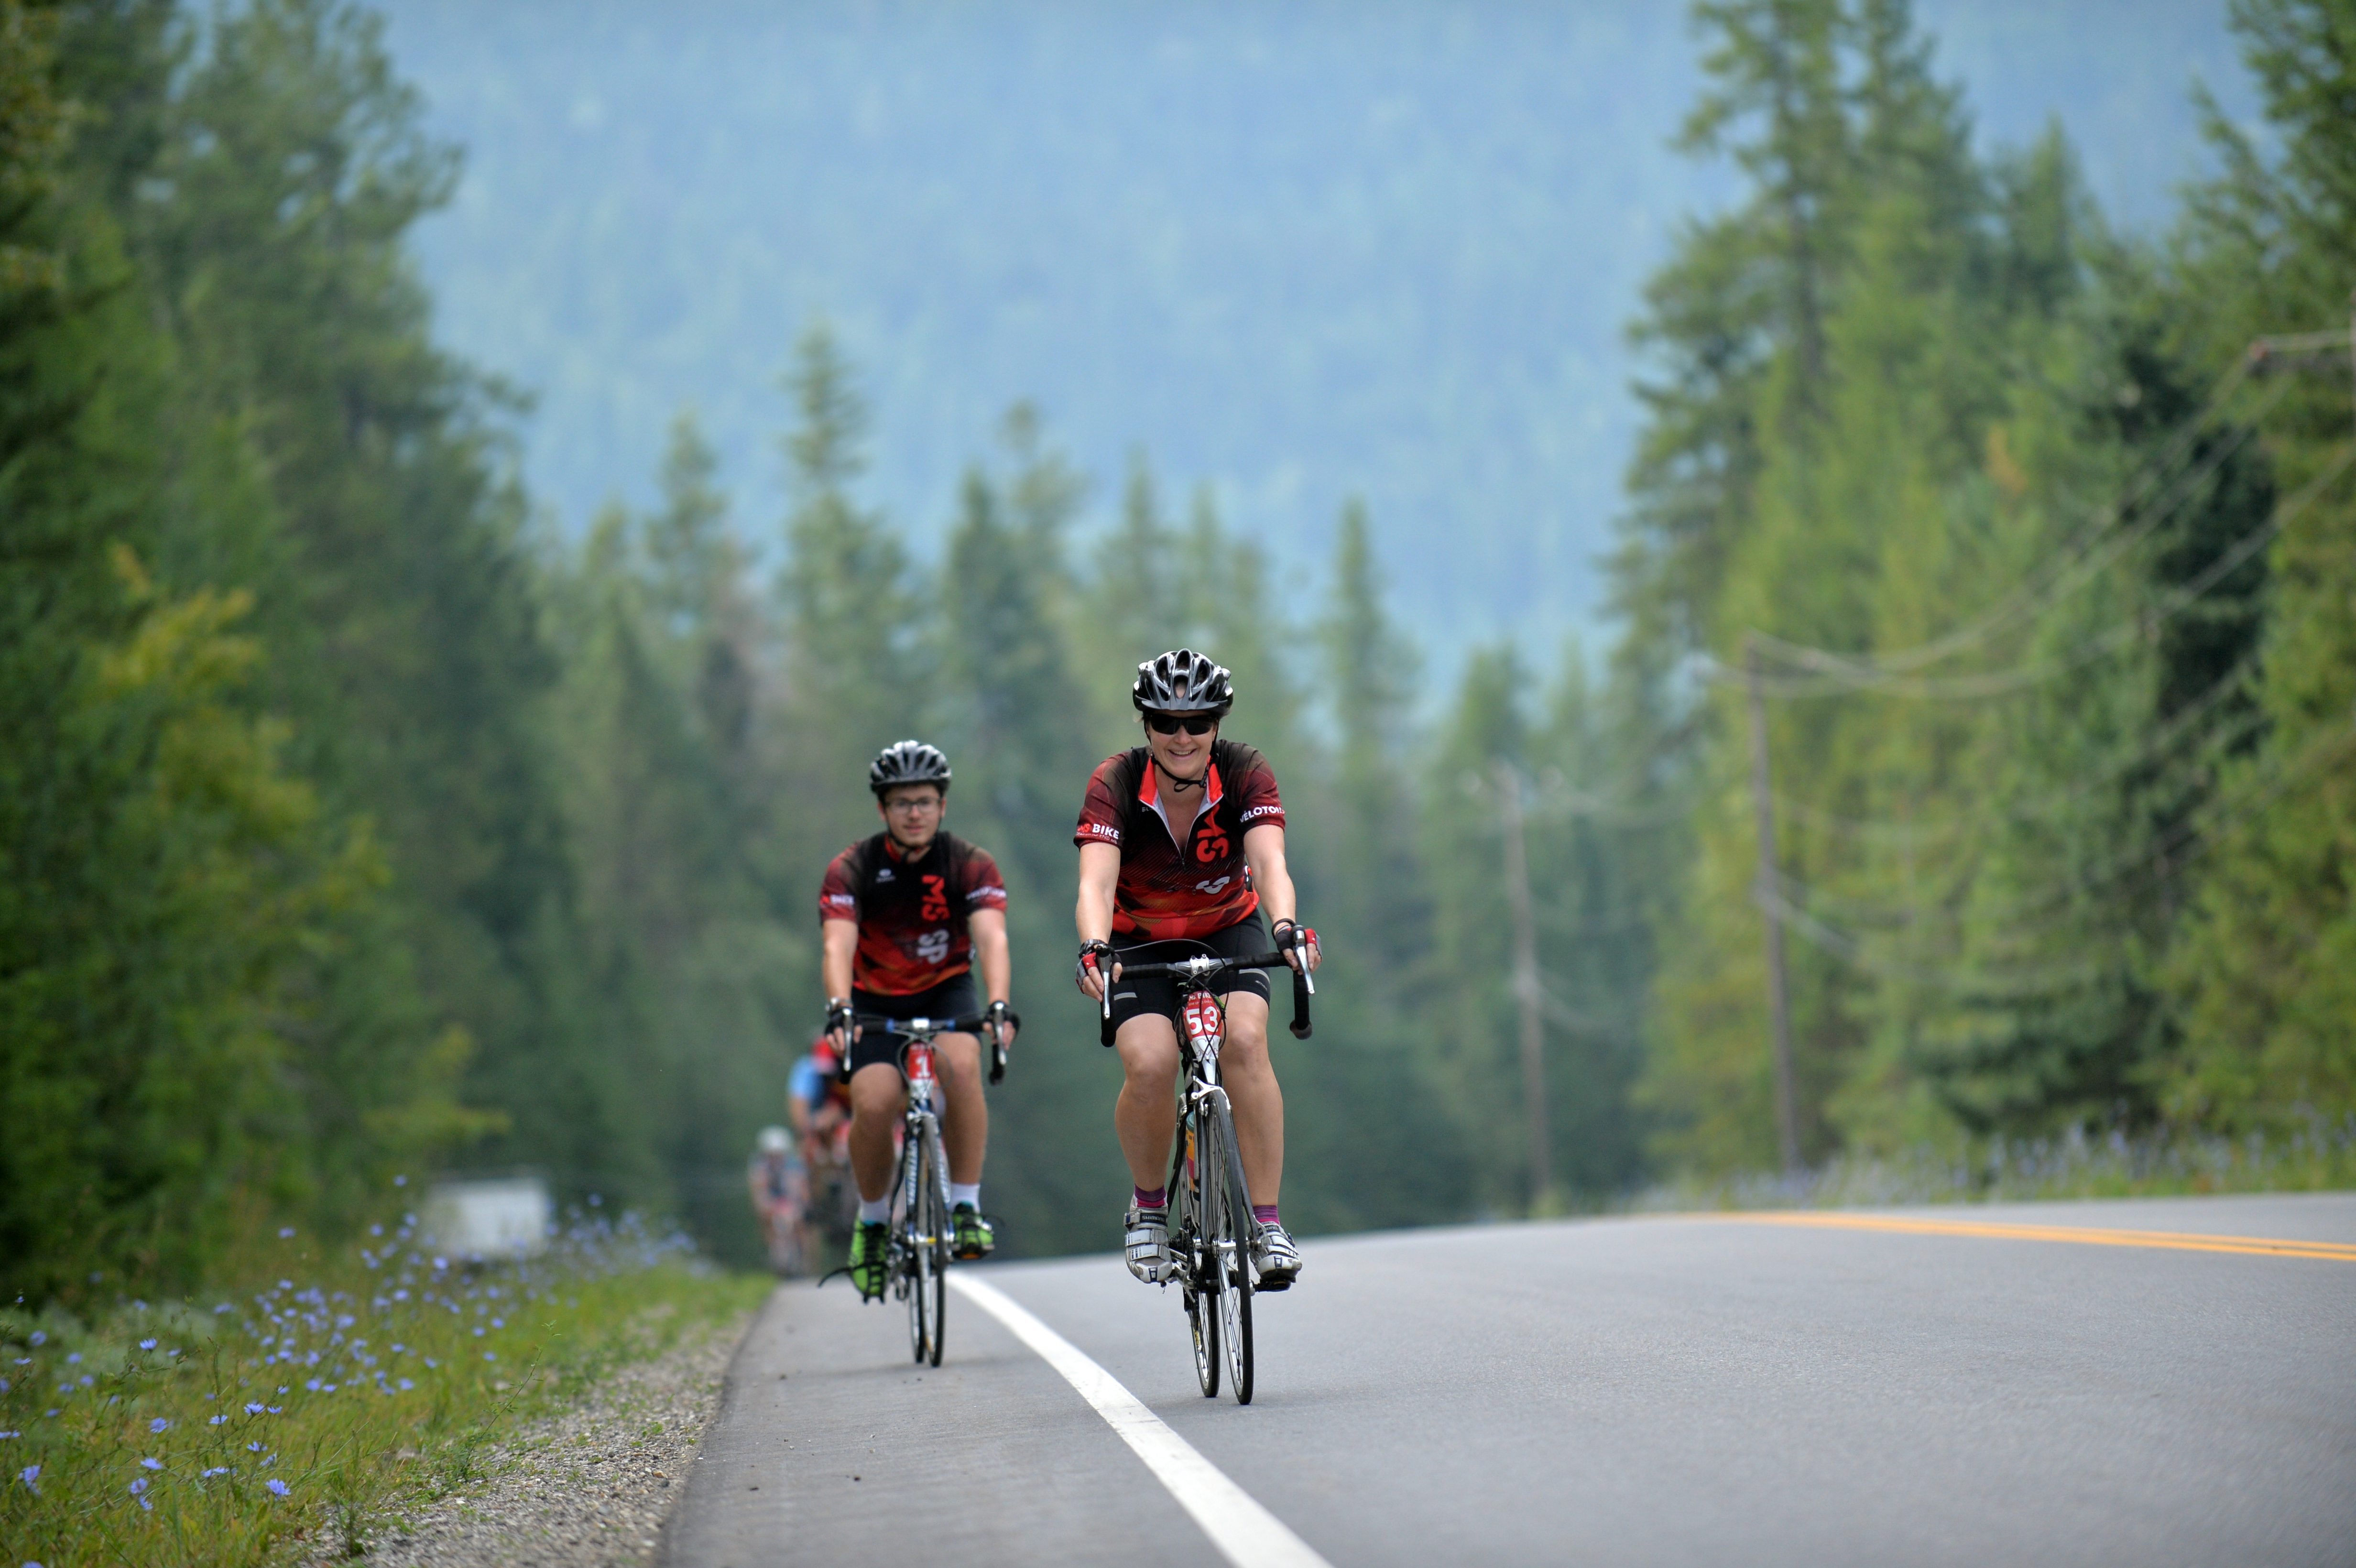 MS Bike tours takes in the best of B.C. Canadian Cycling Magazine